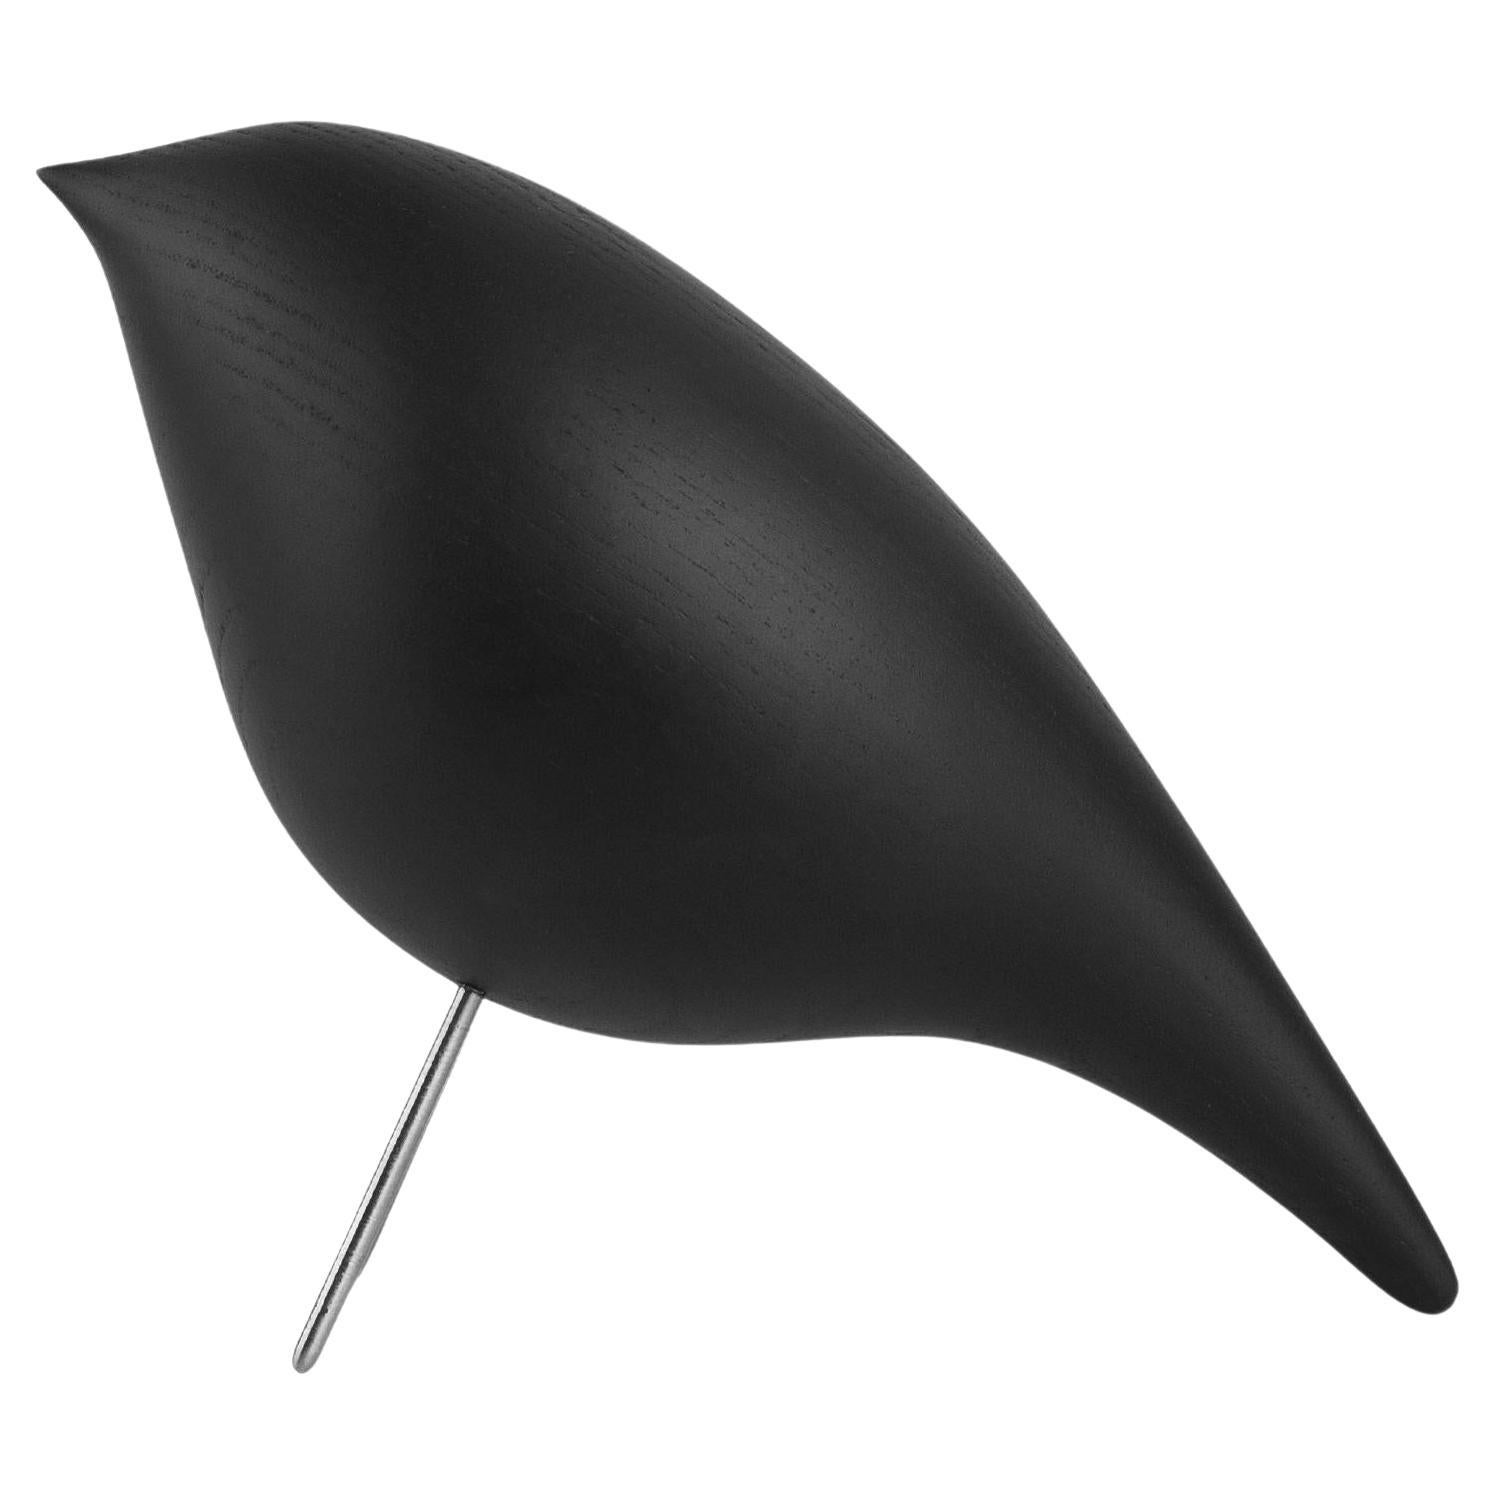 Contemporary 'Tweety Decorative Bird CS3' by Noom, Black Ashwood, In stock For Sale